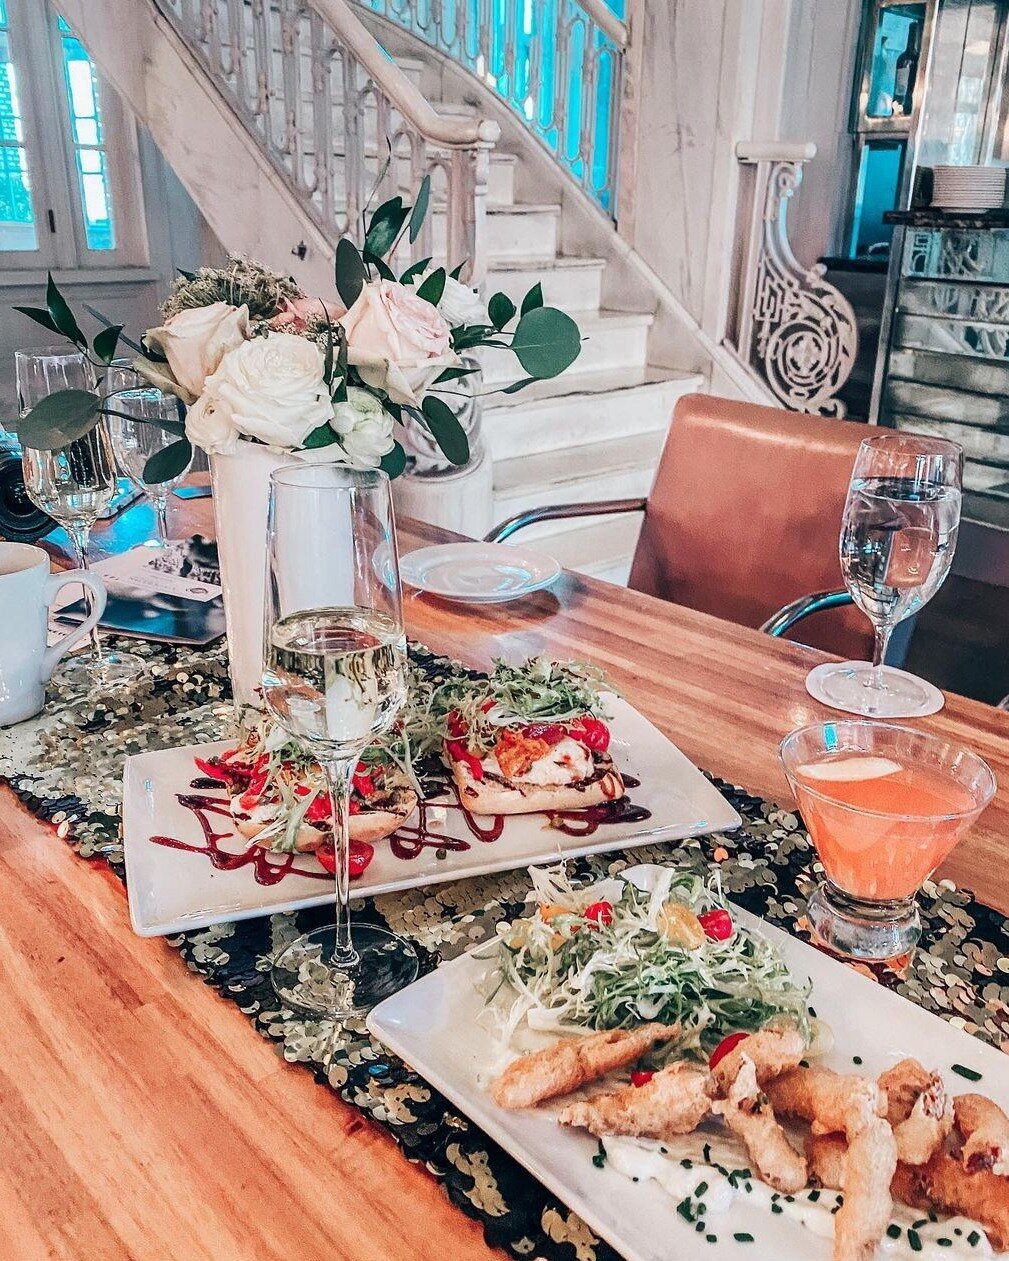 If you're not brunching at Livingston, what are you waiting for? We're excited to see you this weekend! 📸@chanelvanreenen
🥂🥞